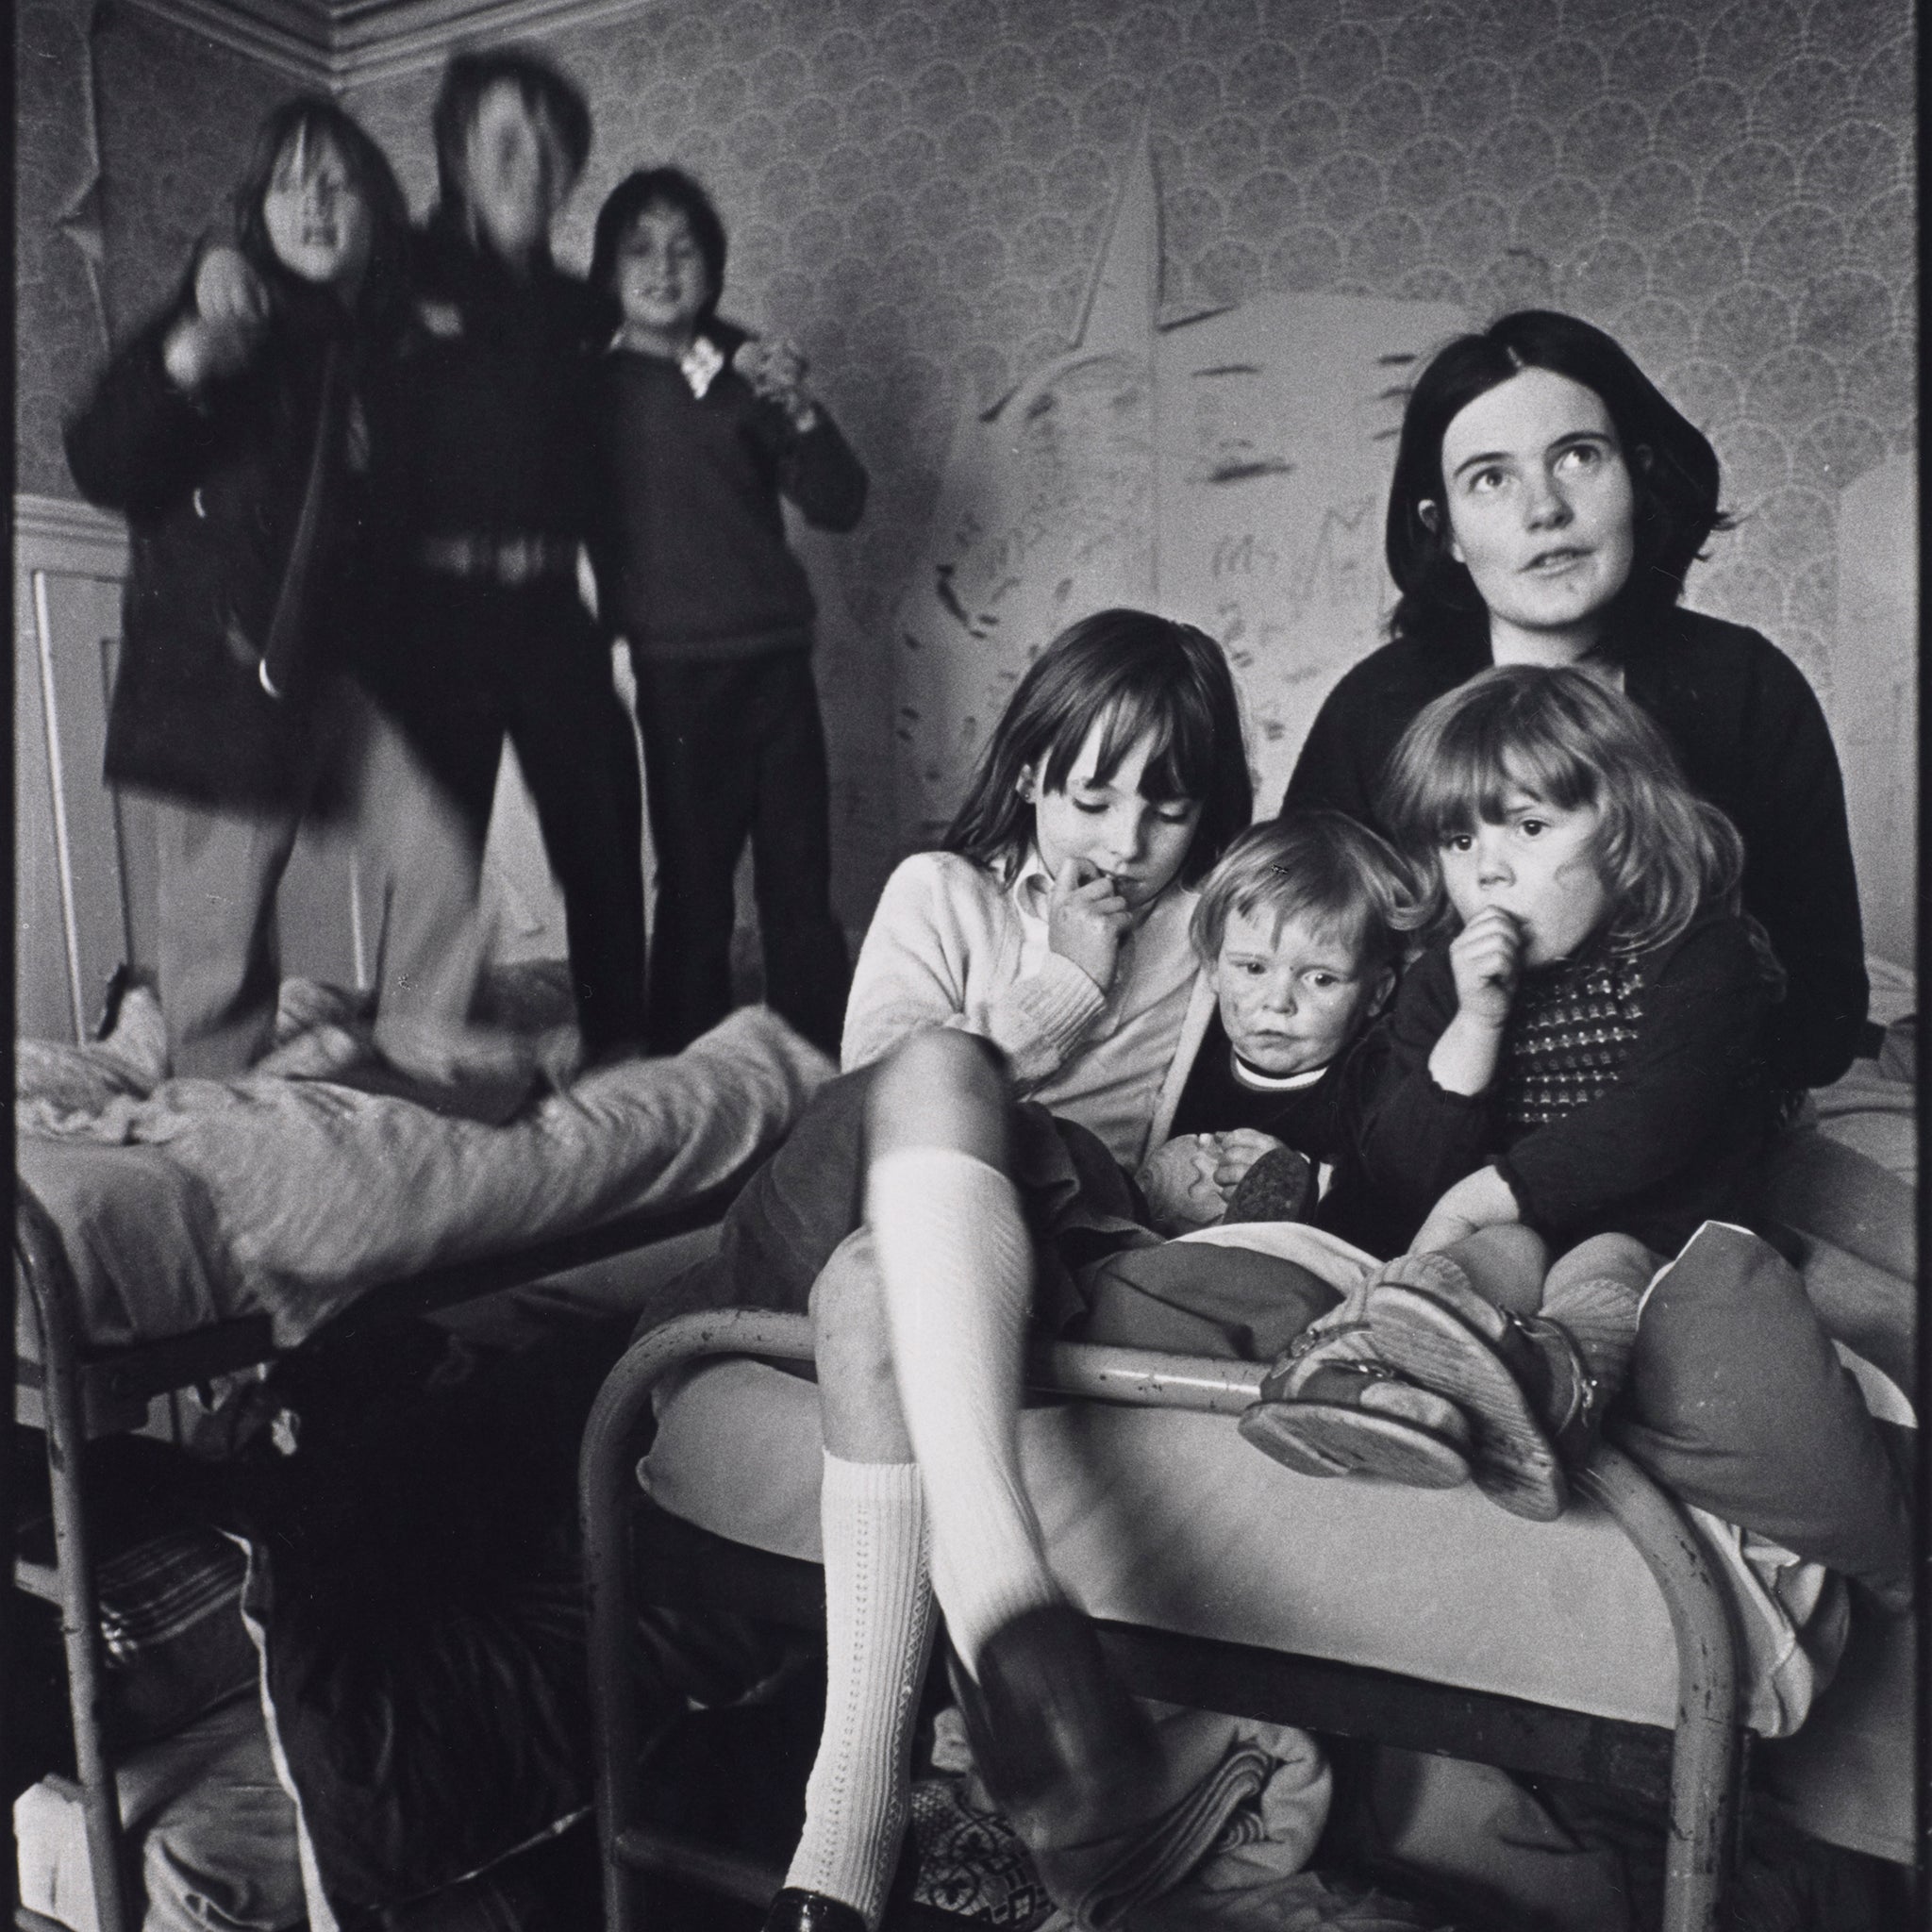 Home truths: Christine Voge’s ‘Untitled (Three Children and Woman)’ (1978)